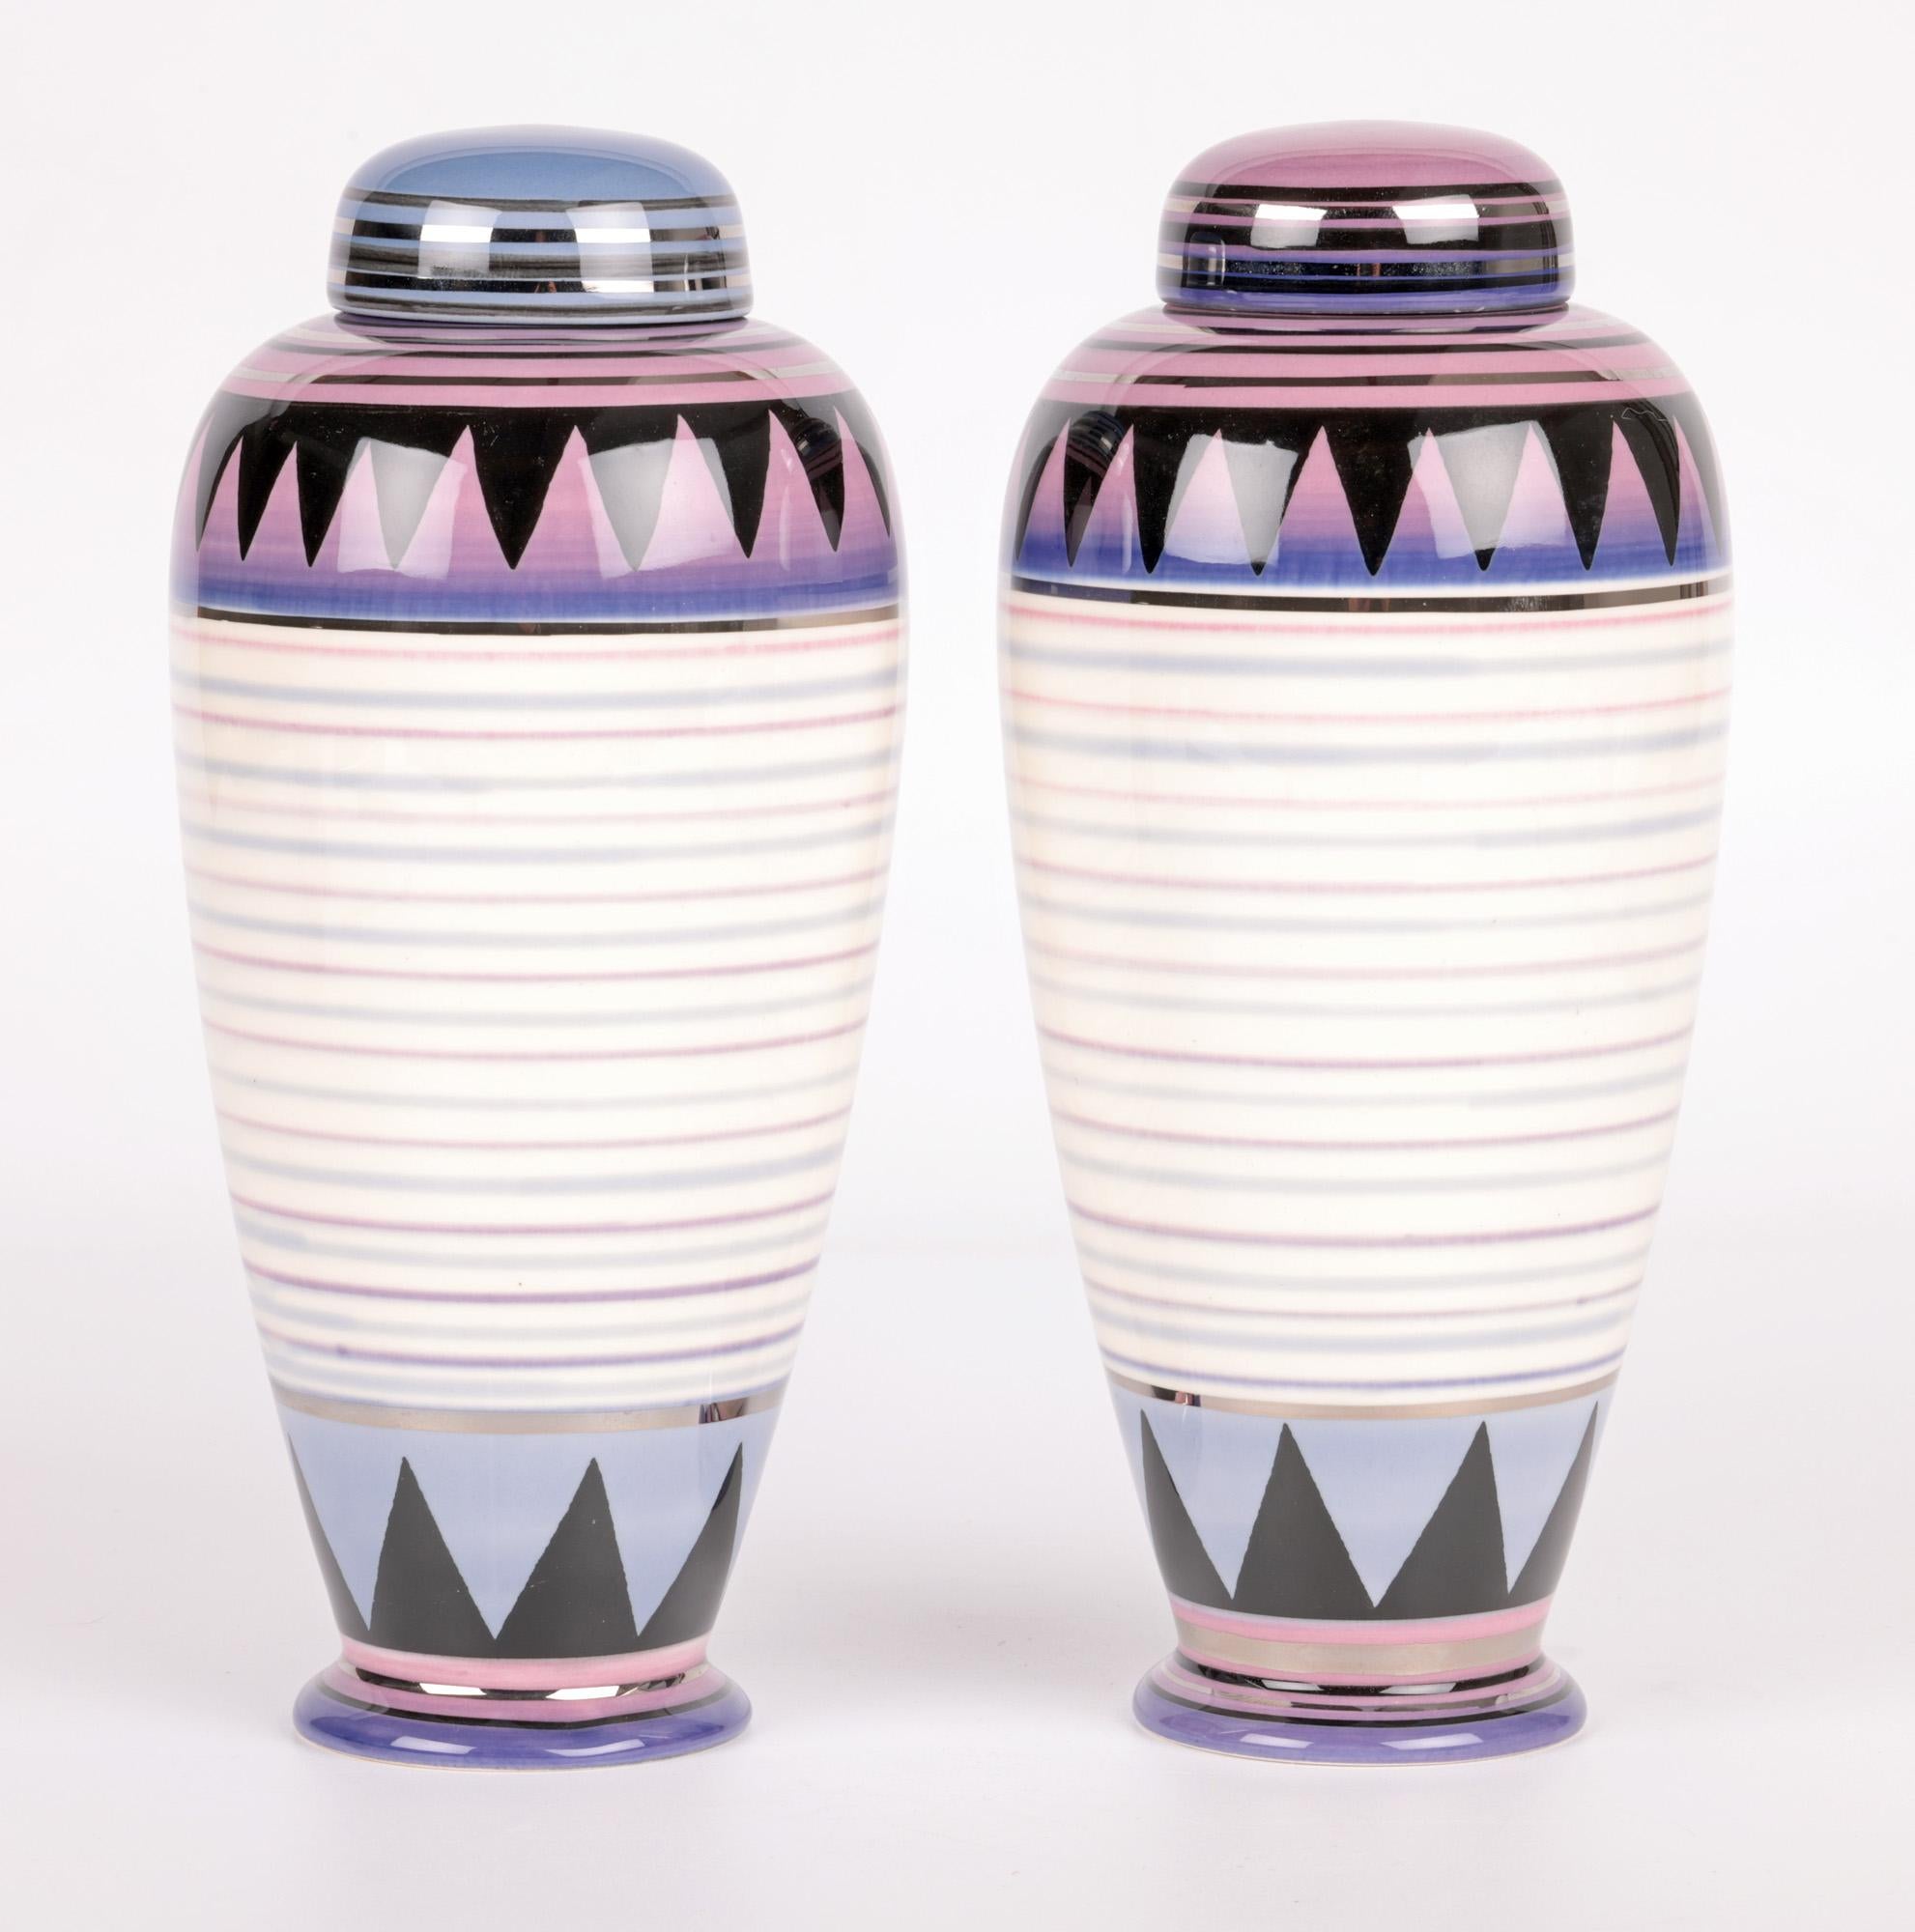 Hand-Painted Moorland Pottery Pair Ceramic Lustre Lidded Vases   For Sale